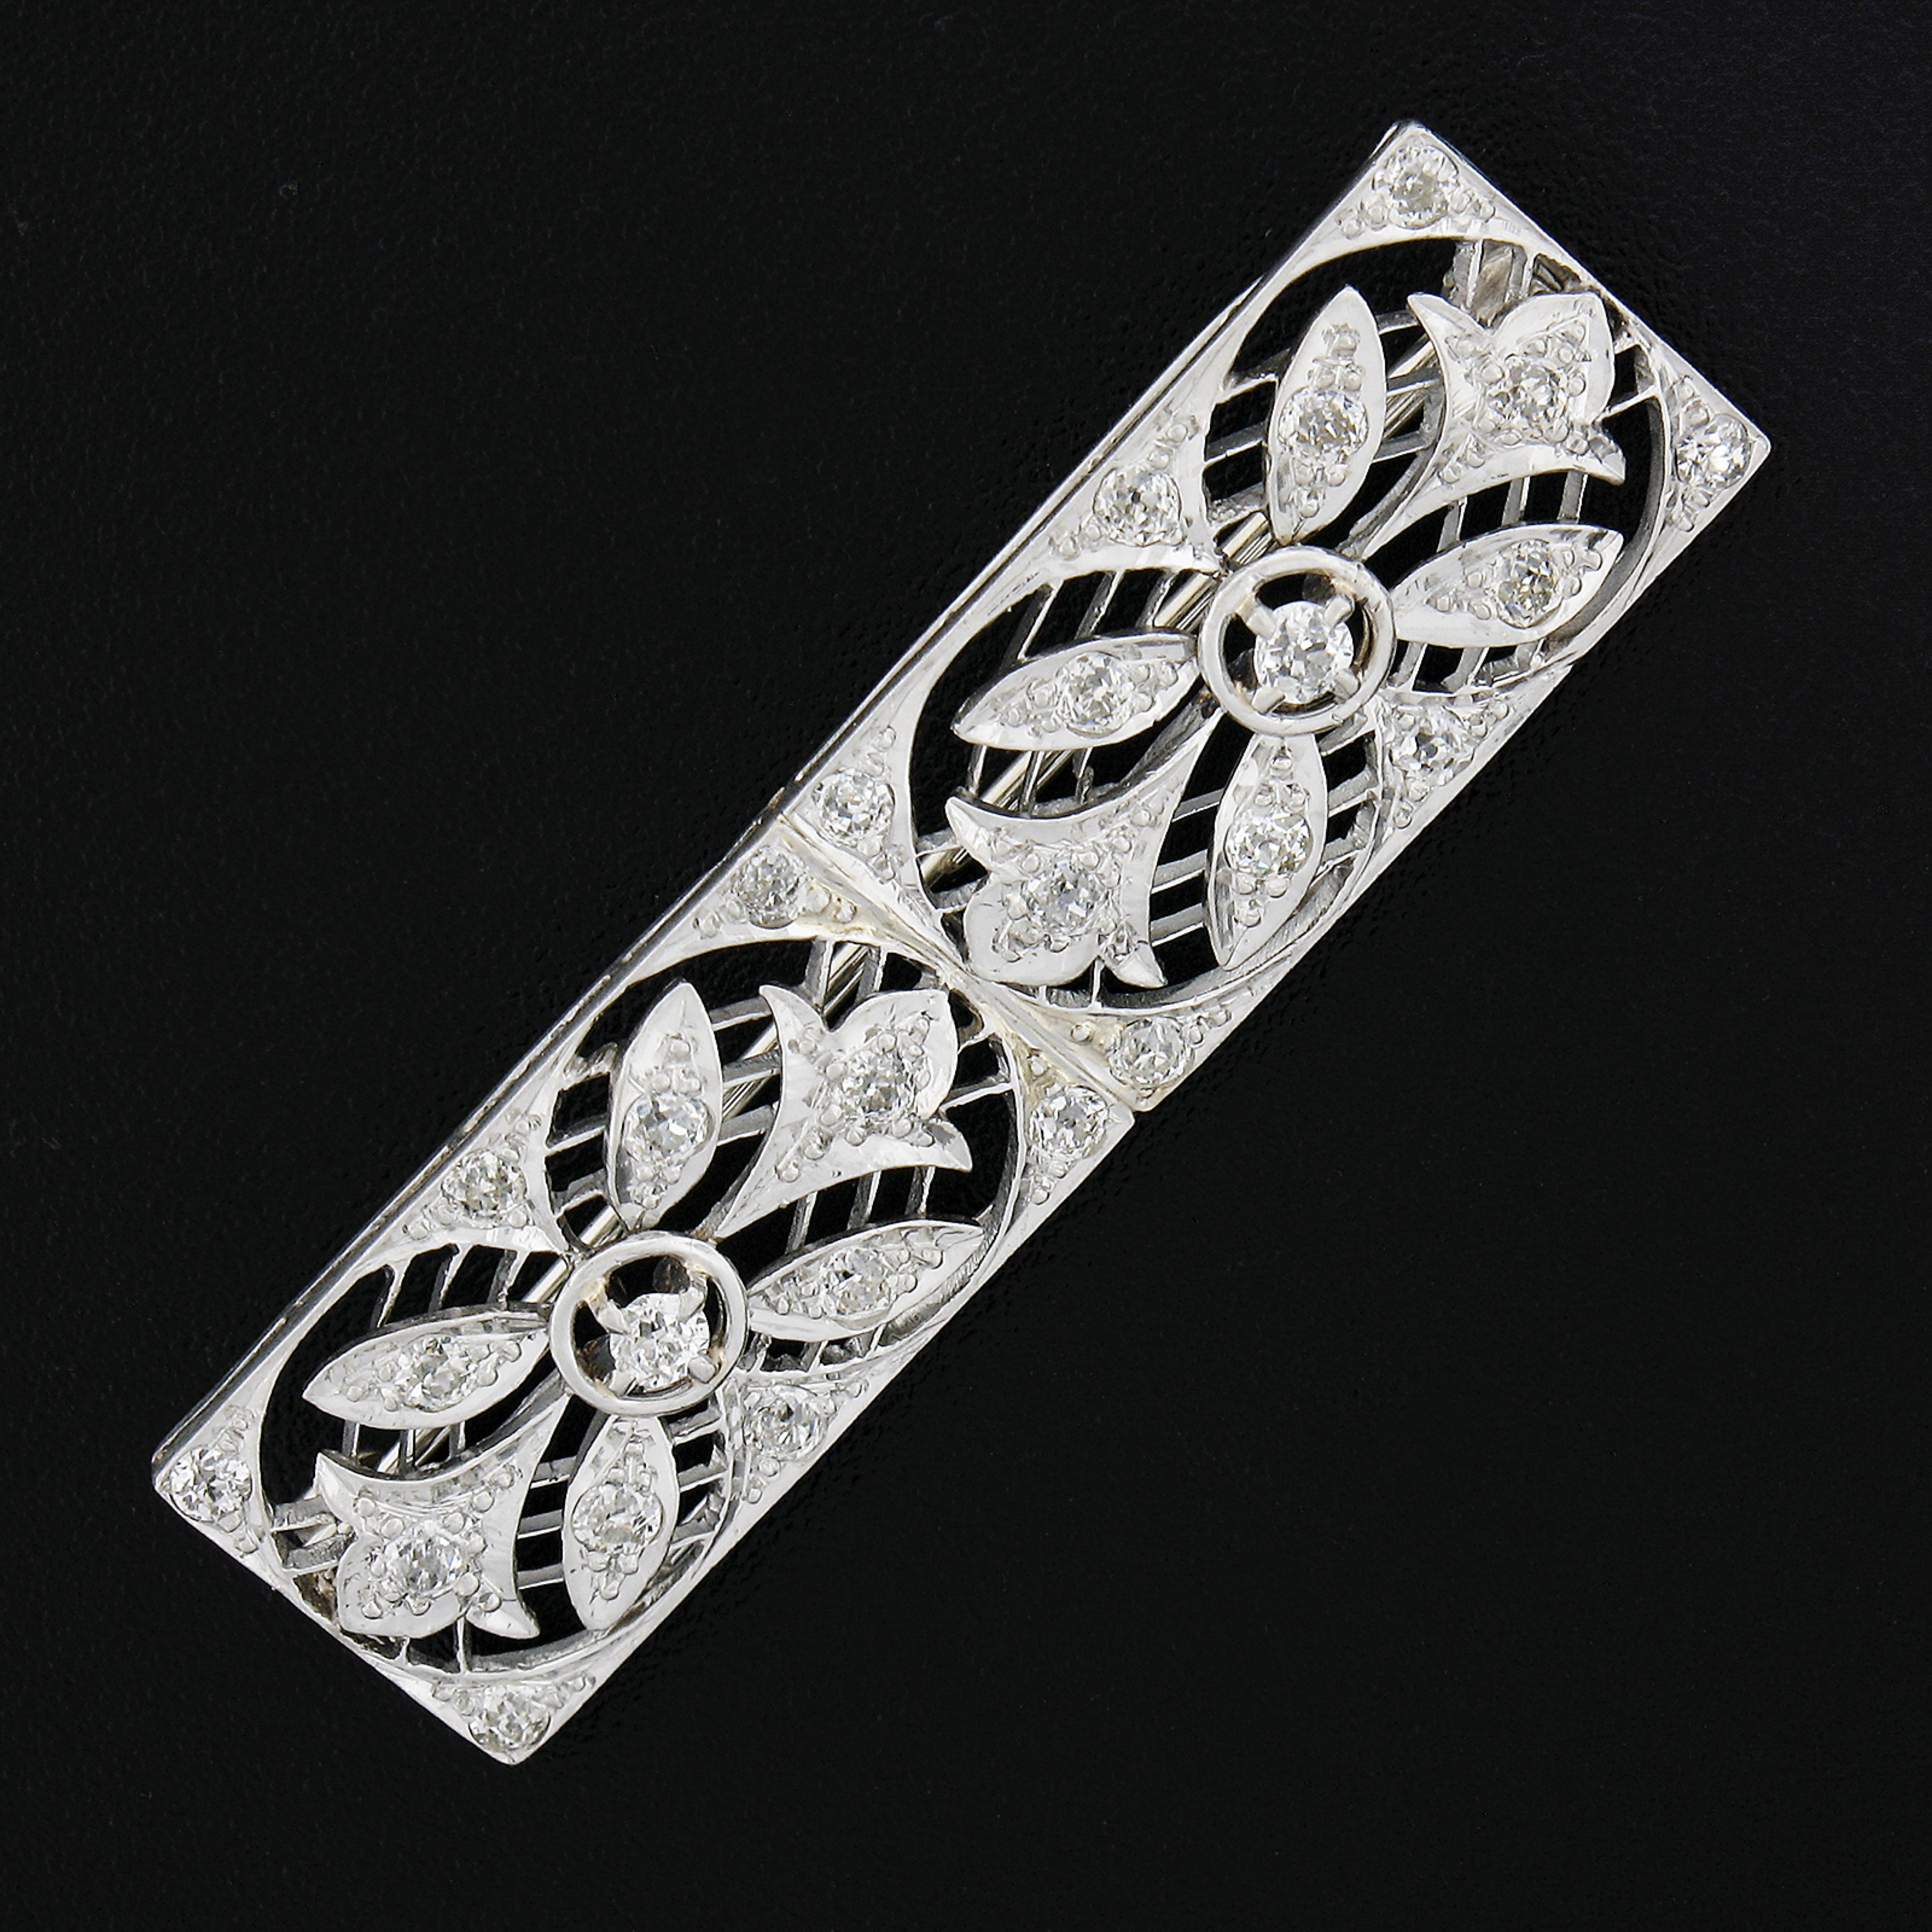 Here we have an elegant antique diamond brooch crafted in solid platinum. It features a unique, floral, open, geometric design that is completely drenched in old European and old mine cut diamonds. The fine diamonds on this piece show outstanding